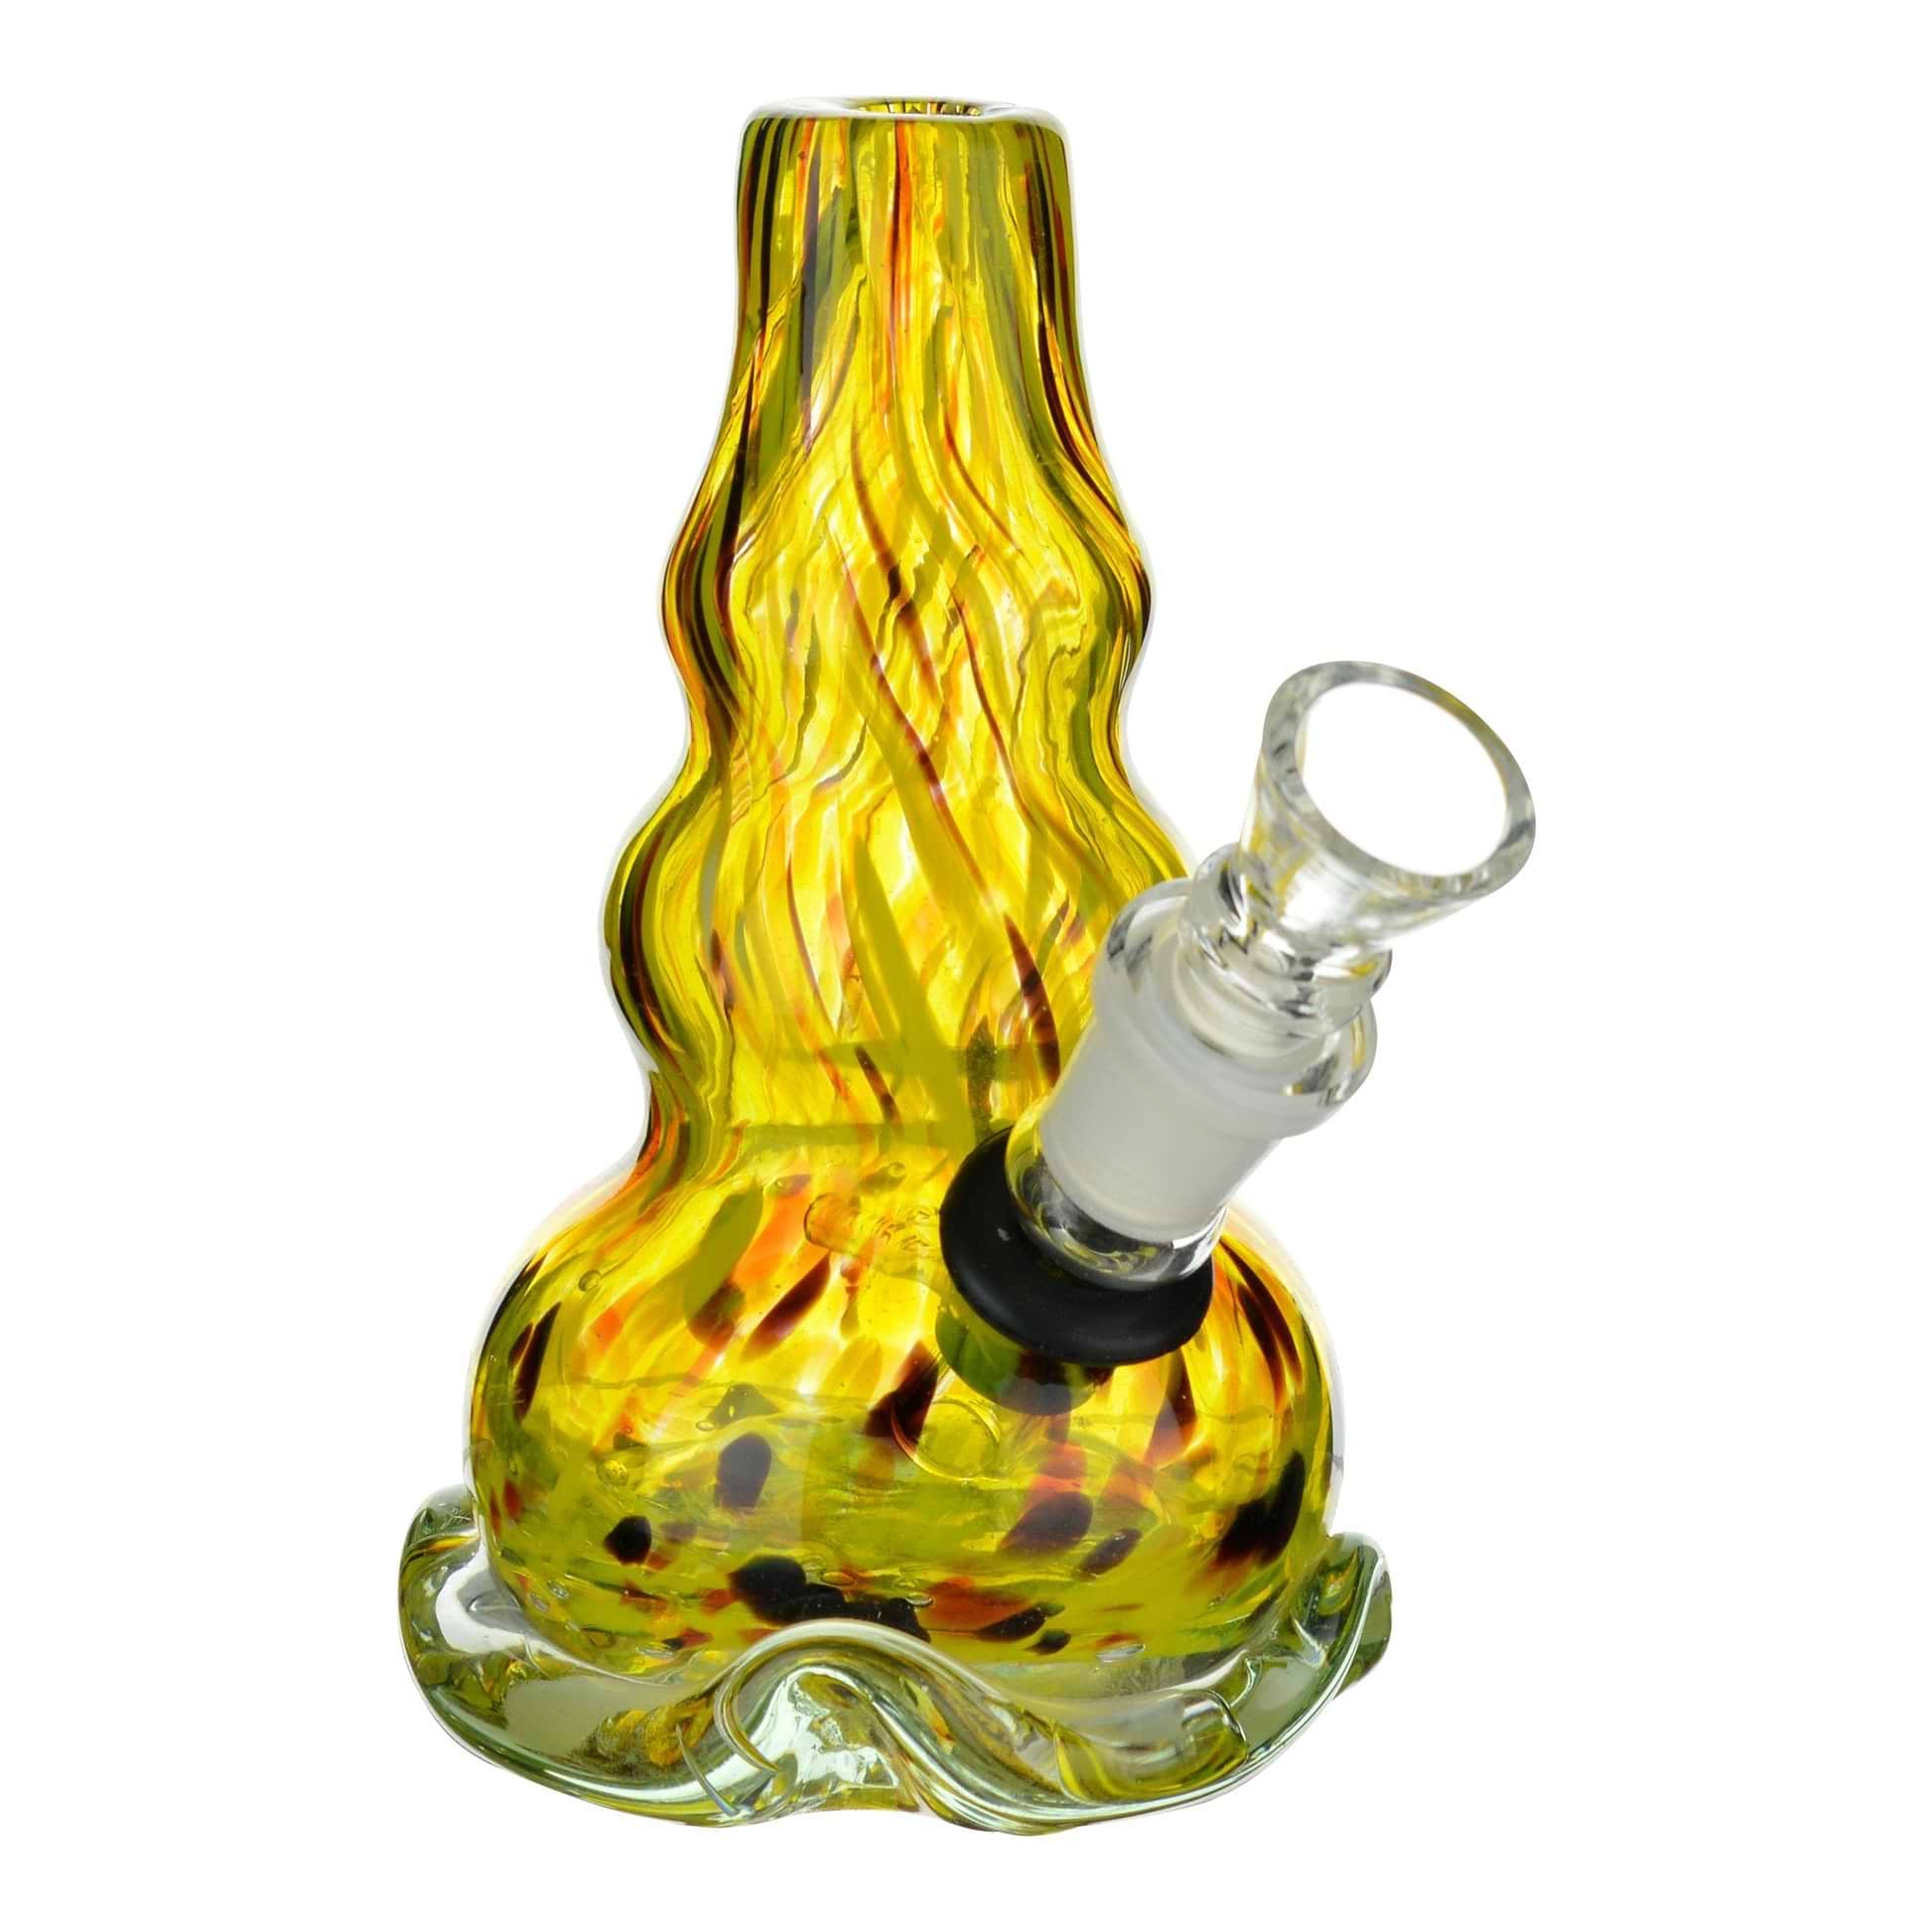 Full shot yellow 5 inch glass bong with lightbulb shape and flower shaped base bowl on right bowl opening visible